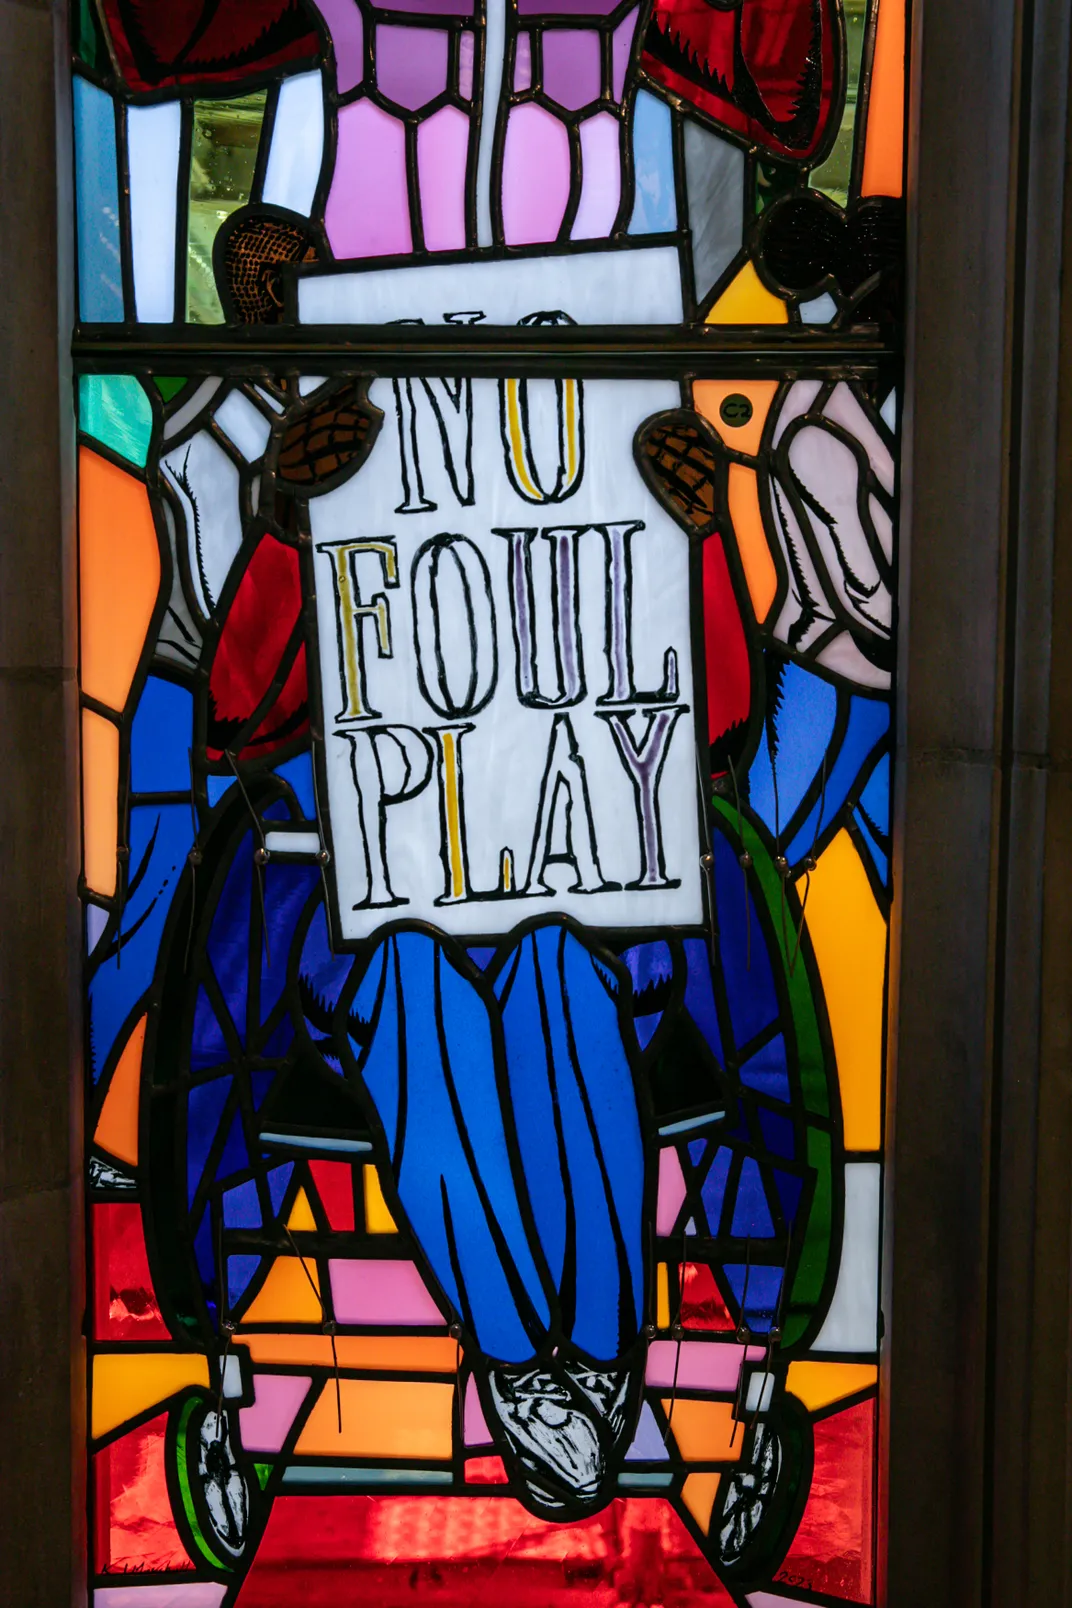 See Washington National Cathedral's New Racial Justice-Themed Stained-Glass  Windows, Smart News